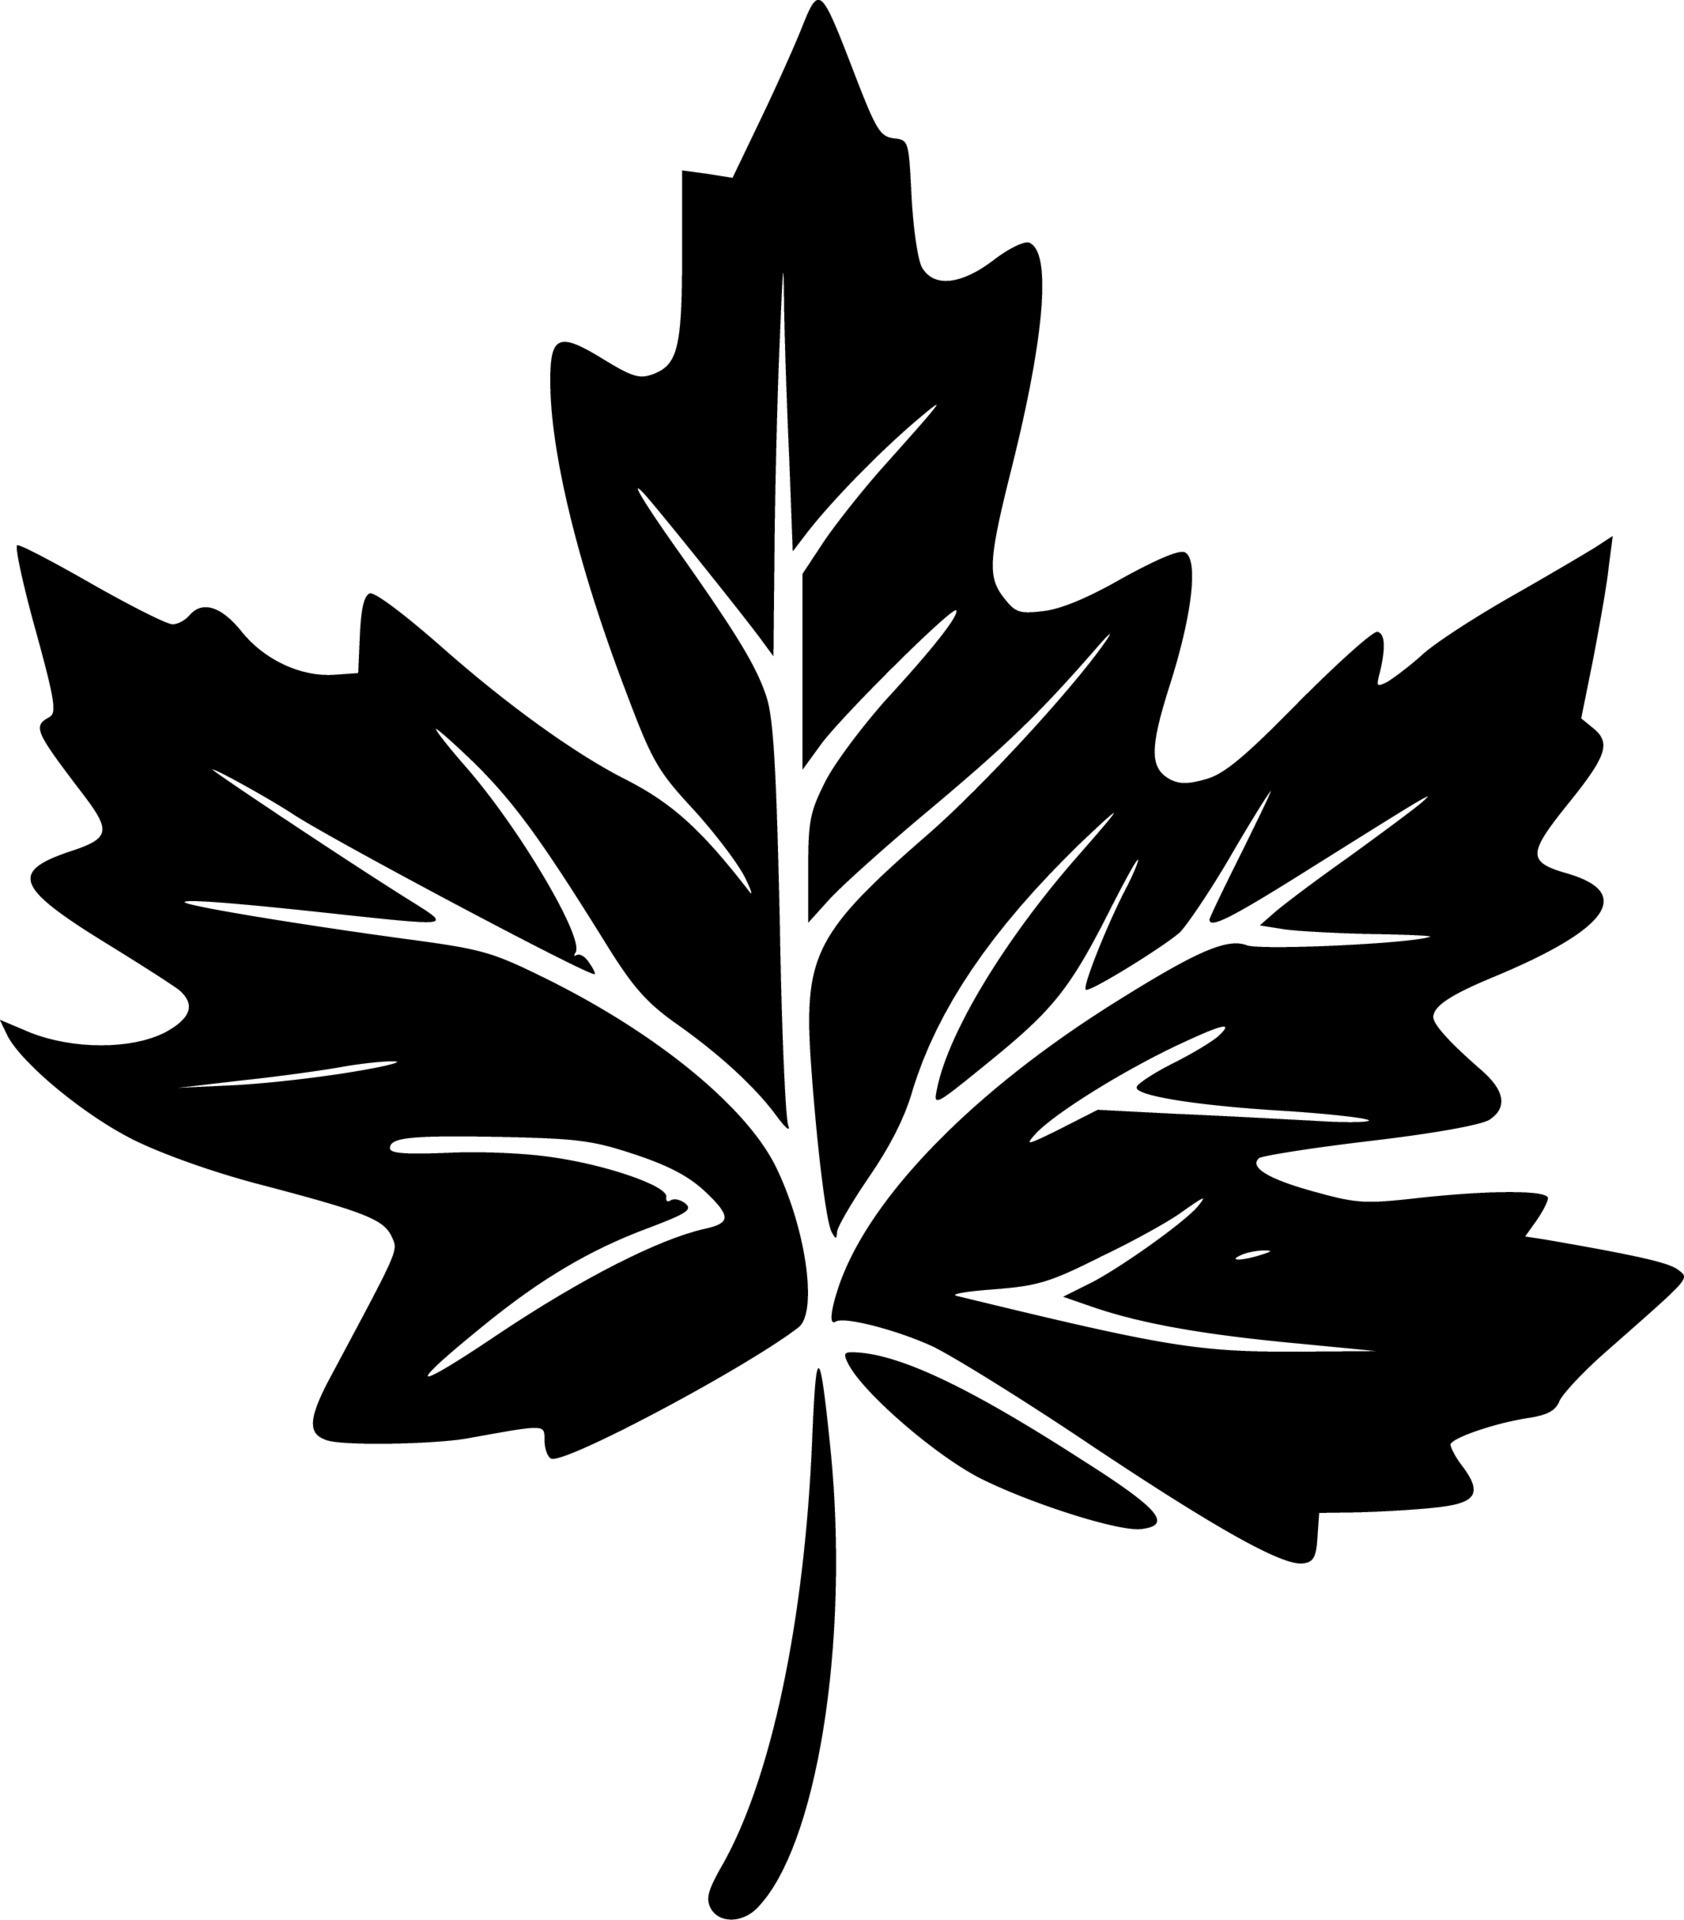 Leaves, Black and White Vector illustration 24141959 Vector Art at Vecteezy